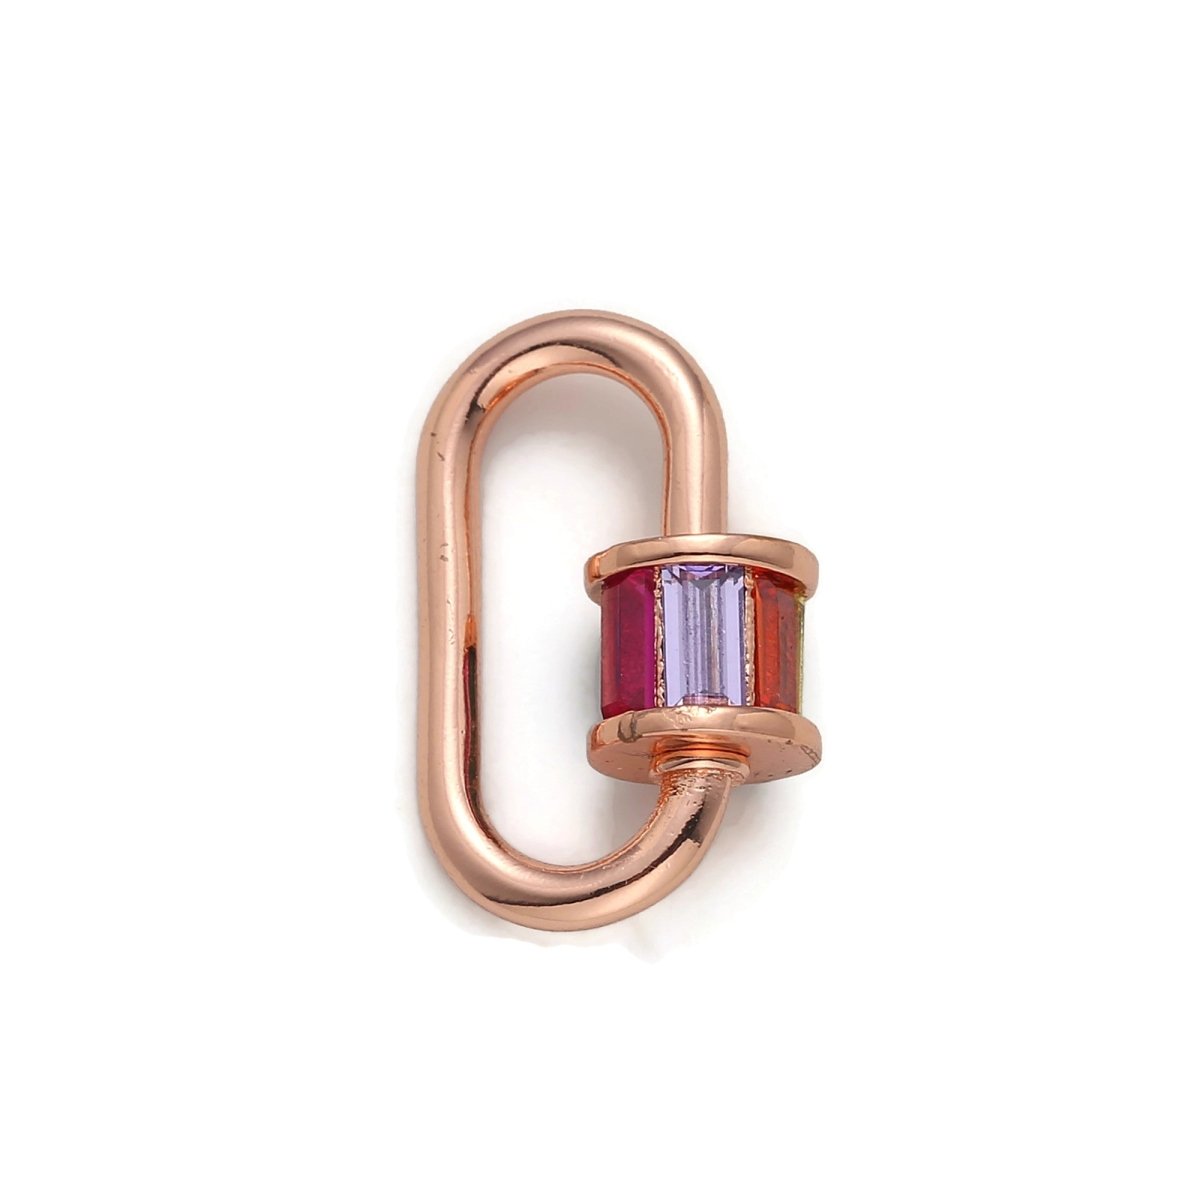 24K Gold-Plated Oval Carabiner, Screw Clasp with Multicolor Glass Panes, Gold, Rose Gold, Silver, or Black Color Options - DLUXCA